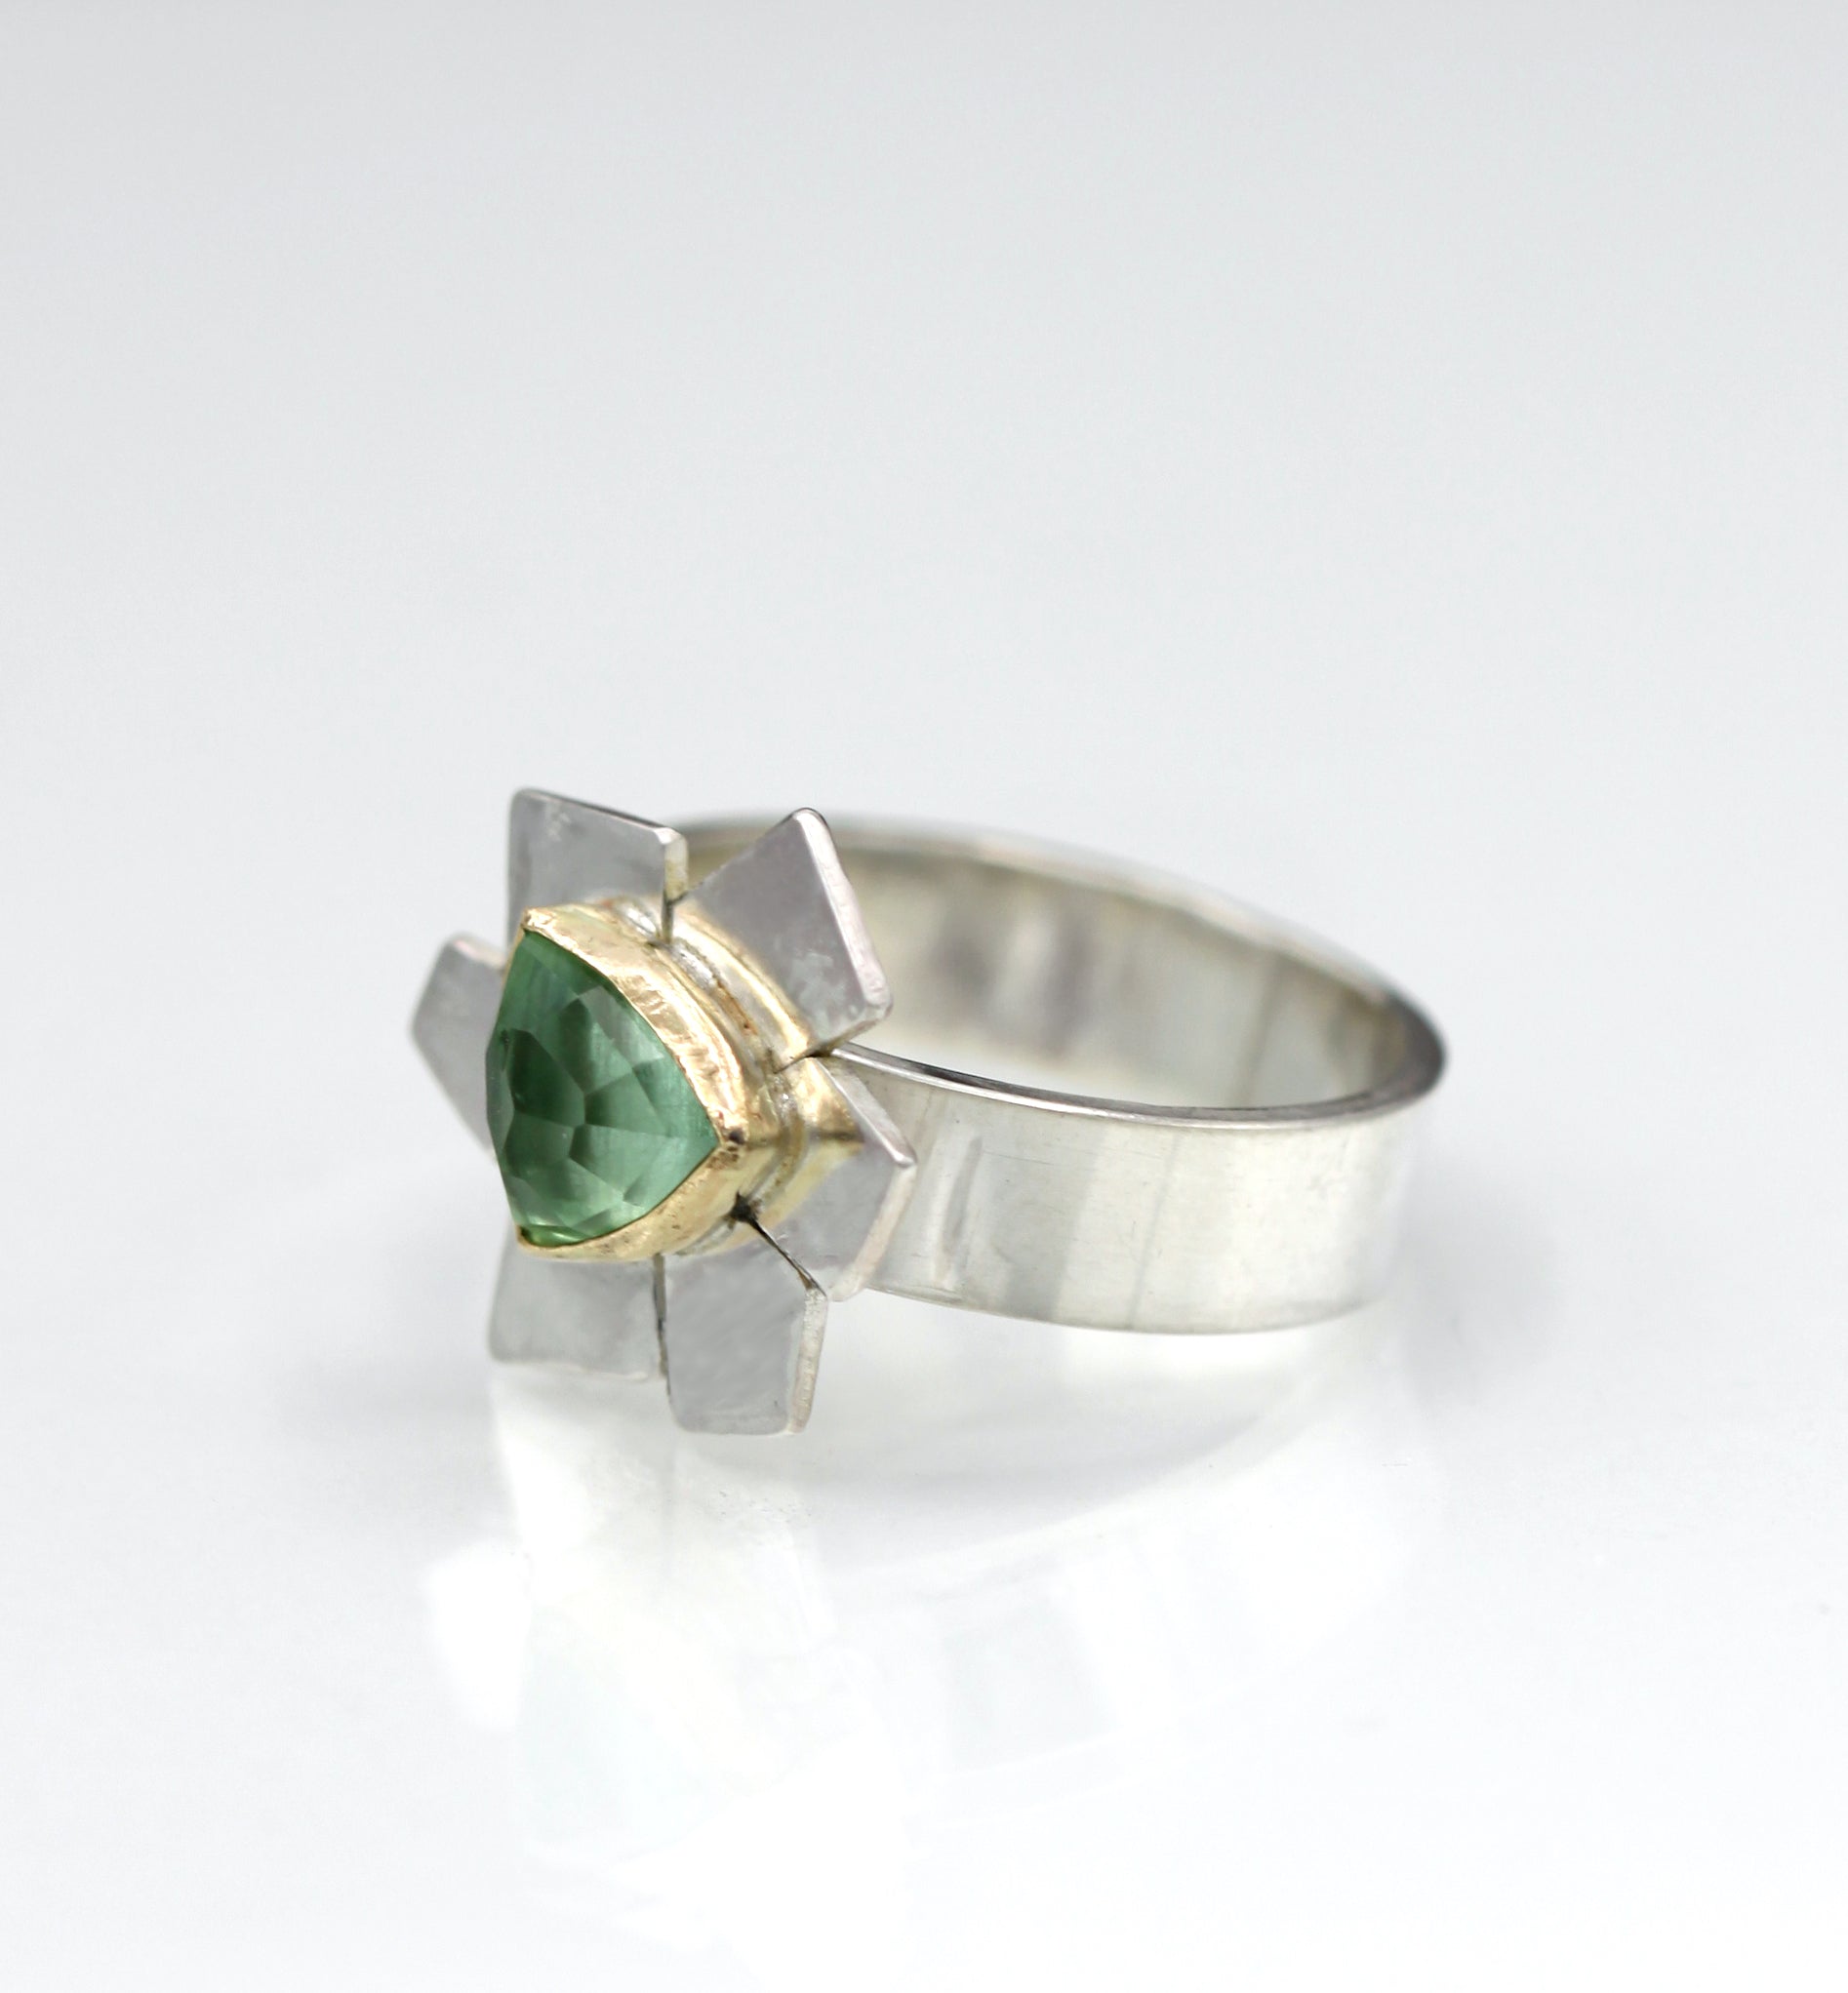 Tourmaline Flower Ring, Sterling and 14K Green Tourmaline Flower Ring, One of a Kind